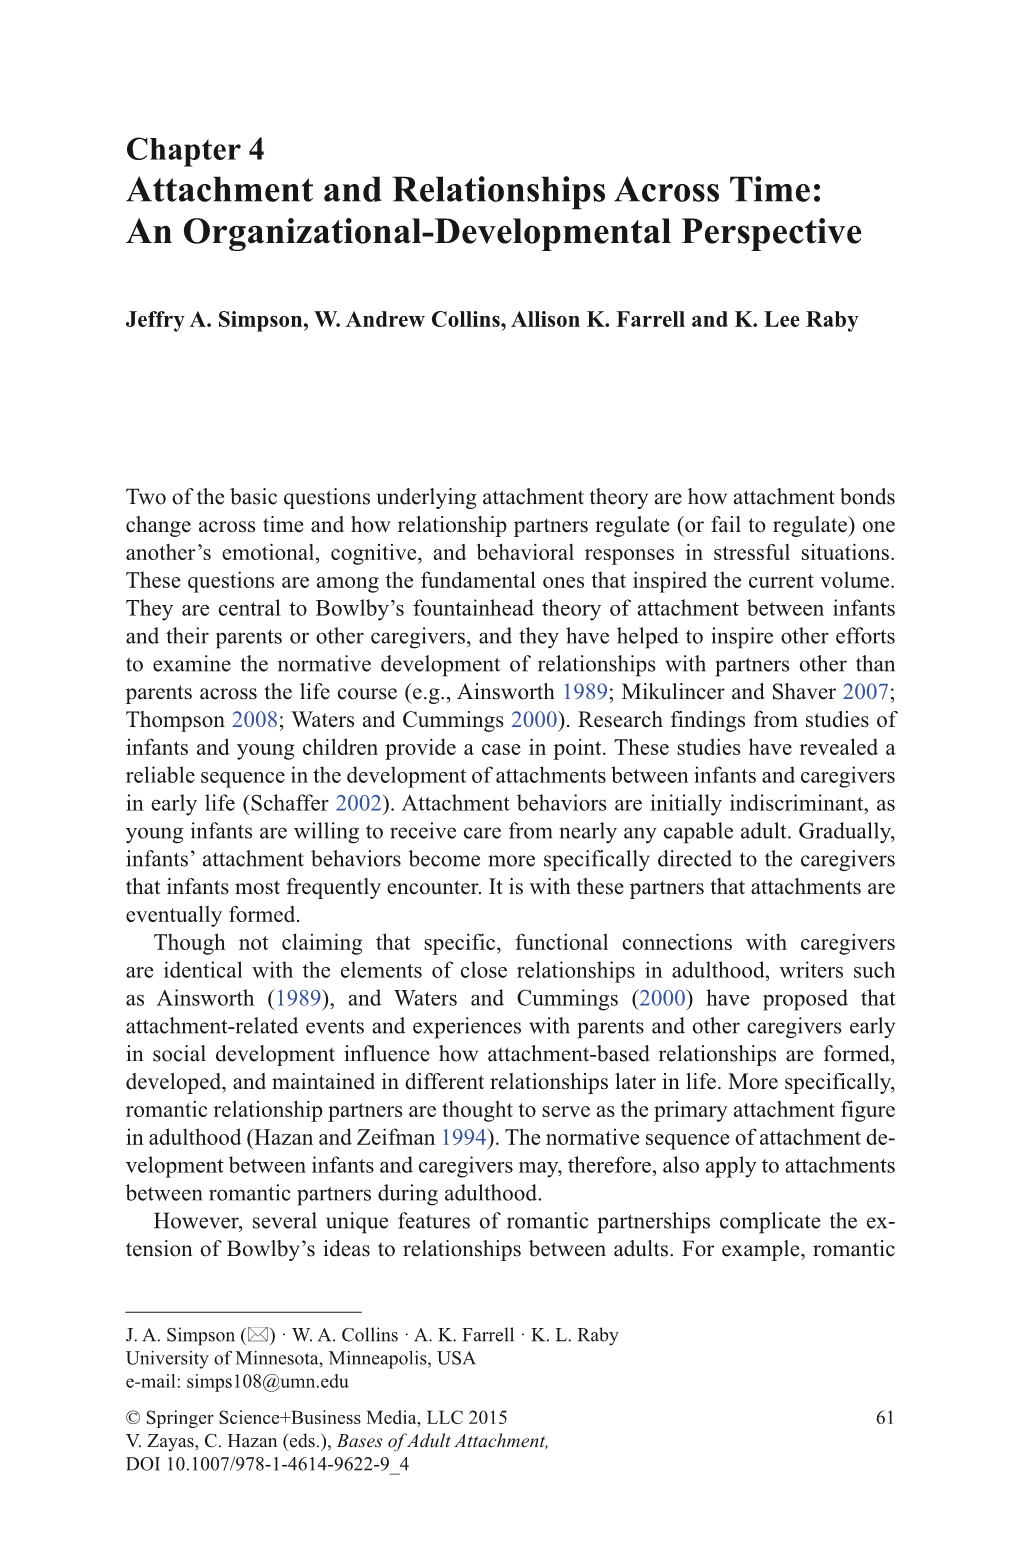 Attachment and Relationships Across Time: an Organizational-Developmental Perspective